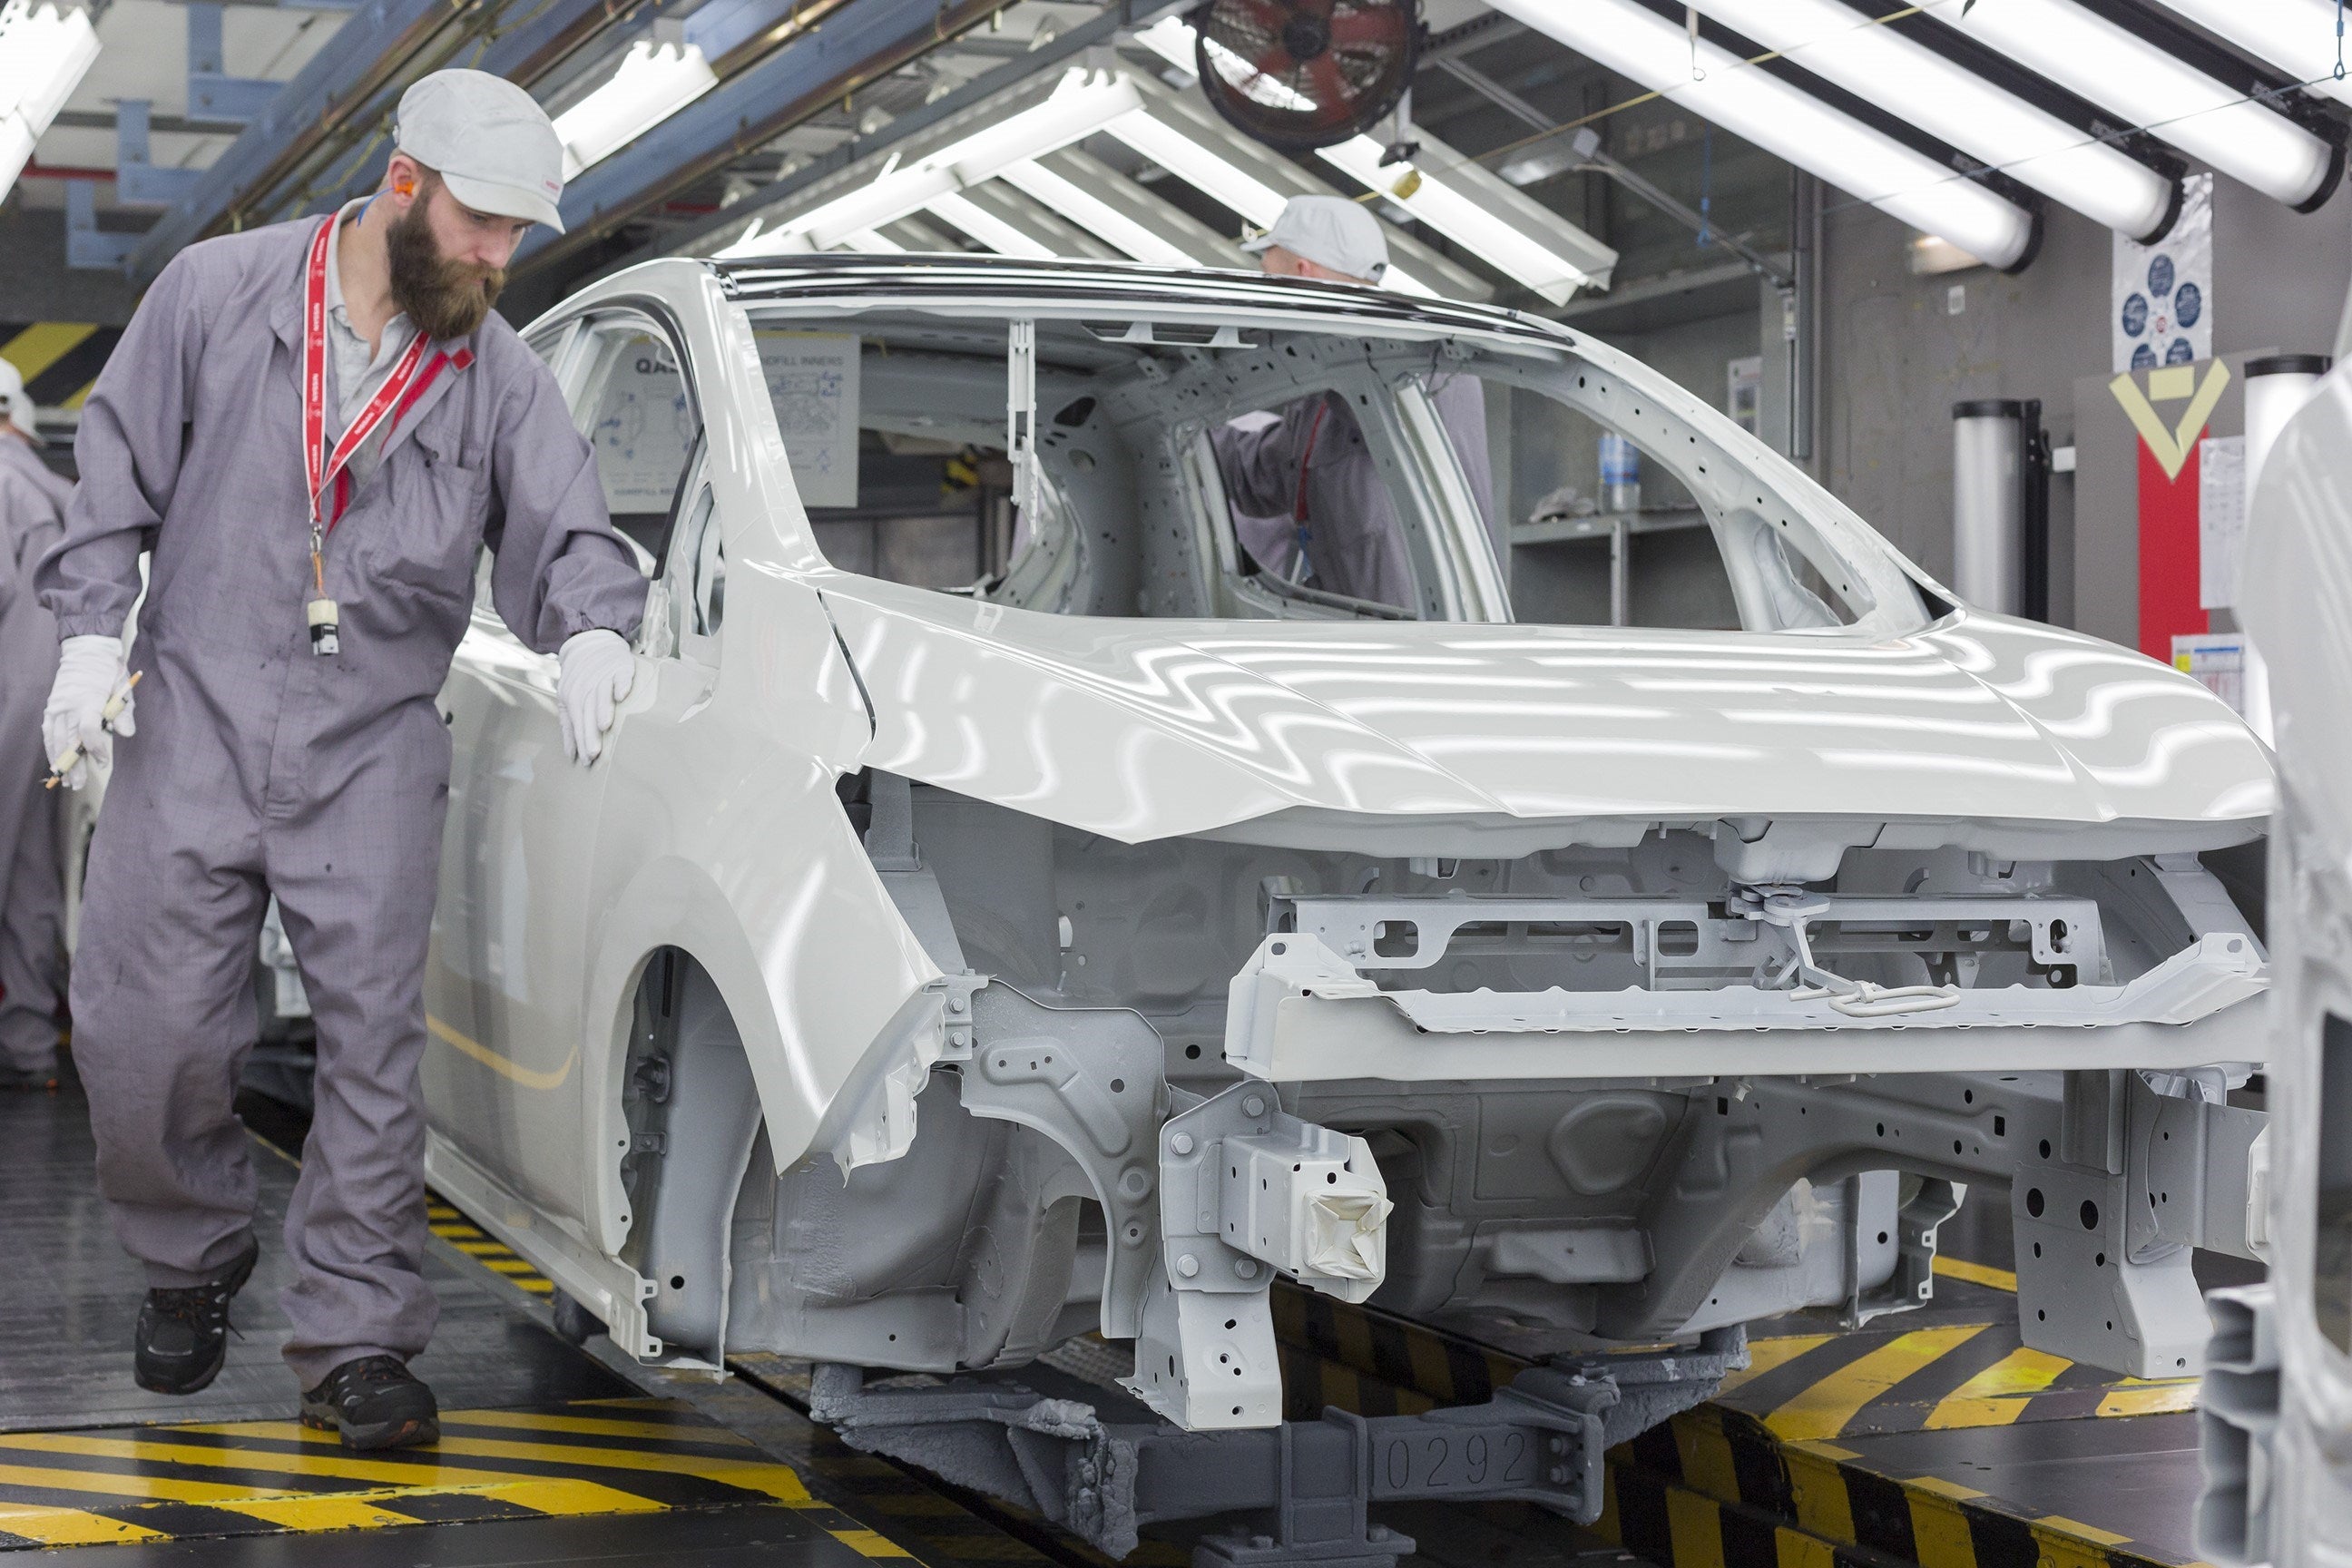 Production of the Nissan Leaf, an electric vehicle, at the plant in Sunderland